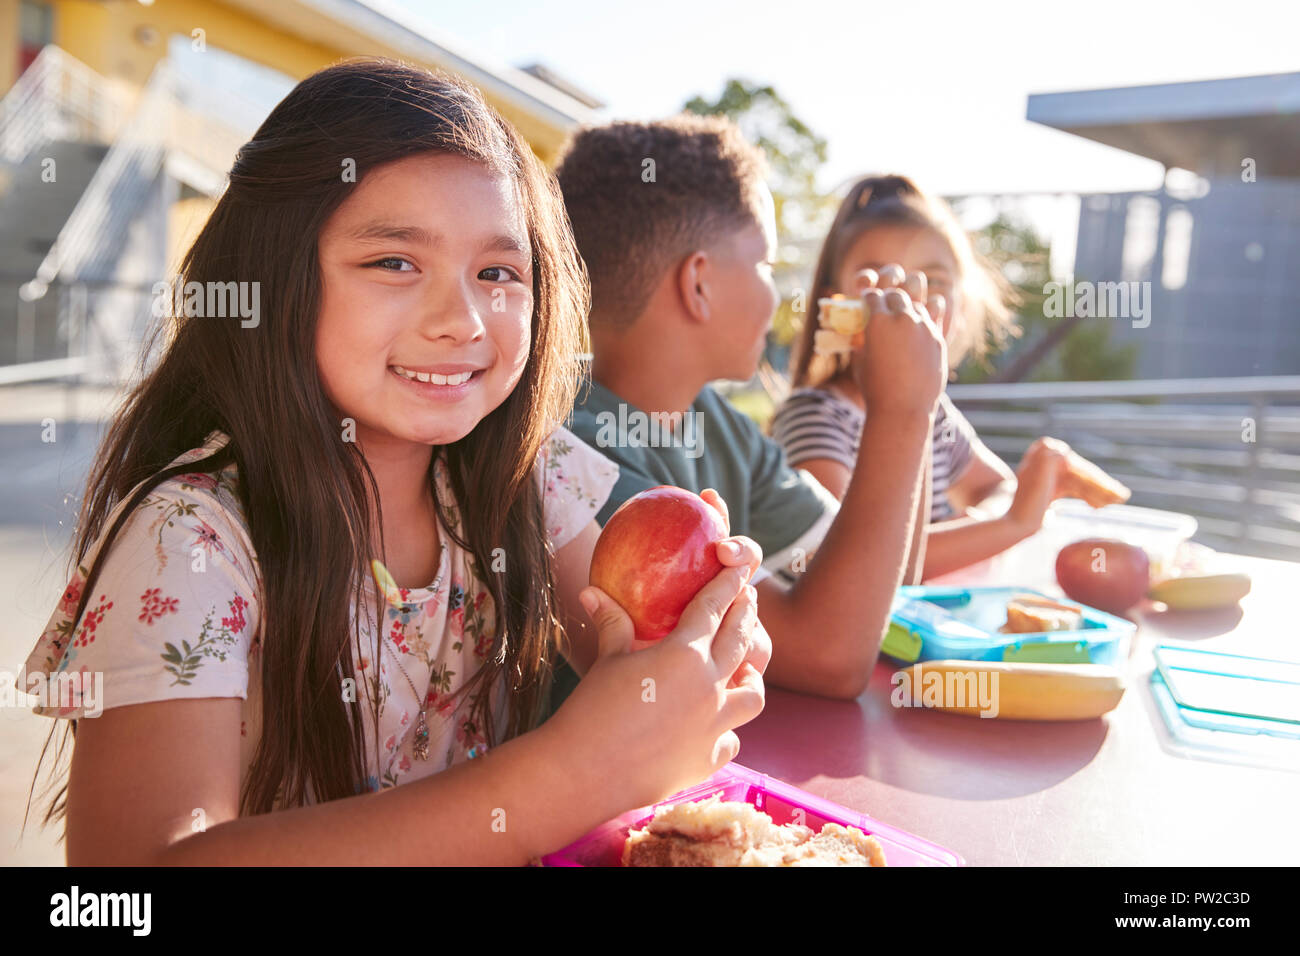 Girl at elementary school lunch table smiling to camera Stock Photo